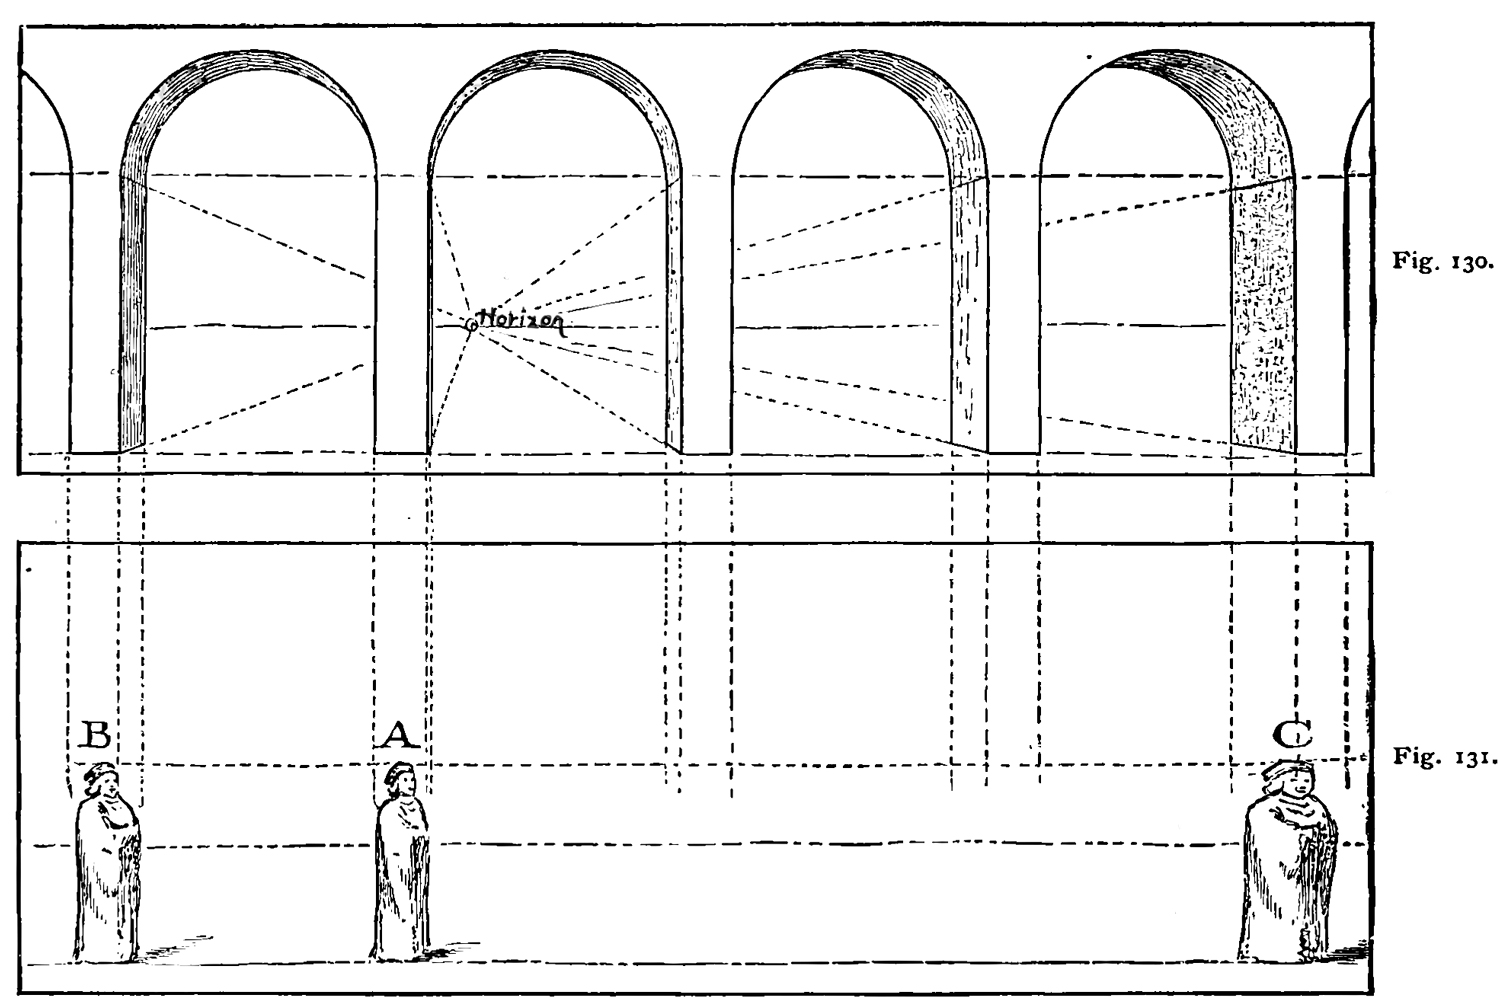 proportions of the figures had been determined by applying the principles of plane perspective